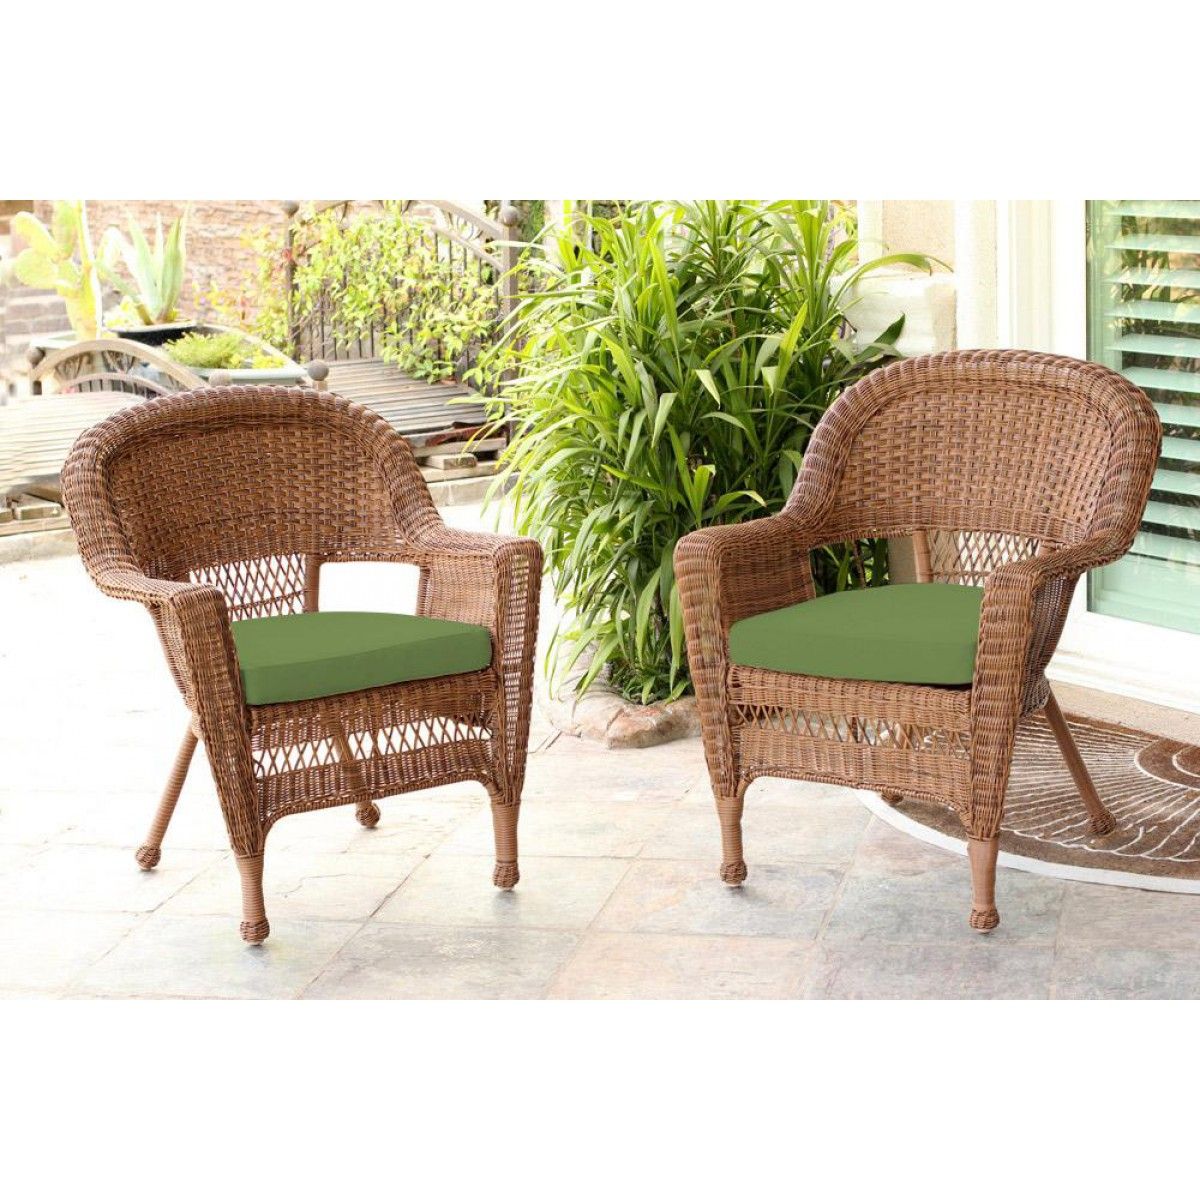 Honey Wicker Chair With Hunter Green Cushion – Set Of 2 With Green Rattan Outdoor Rocking Chair Sets (View 3 of 15)